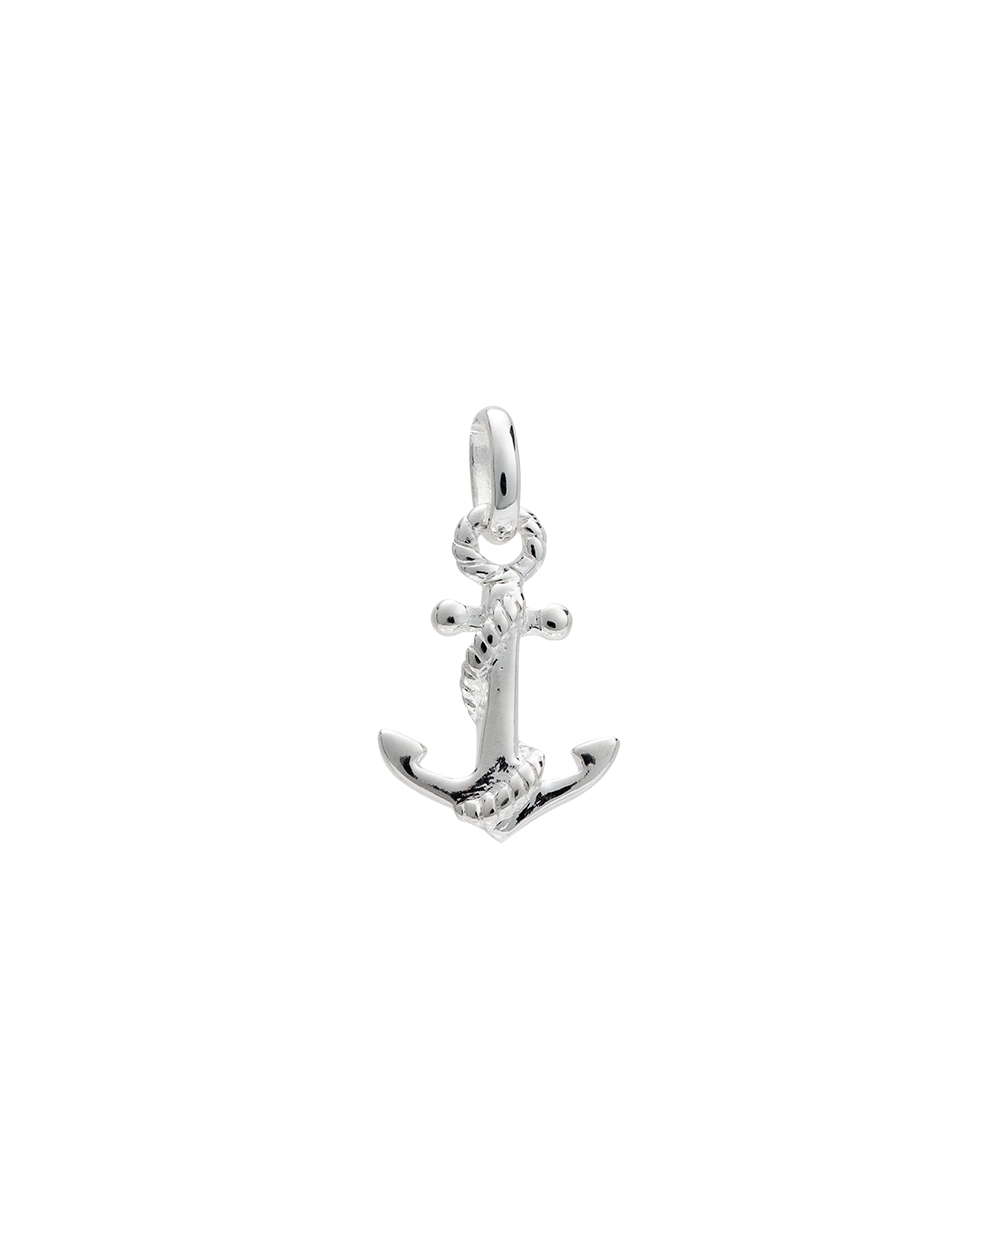 ANCHOR CHARM (STERLING SILVER) - IMAGE 1